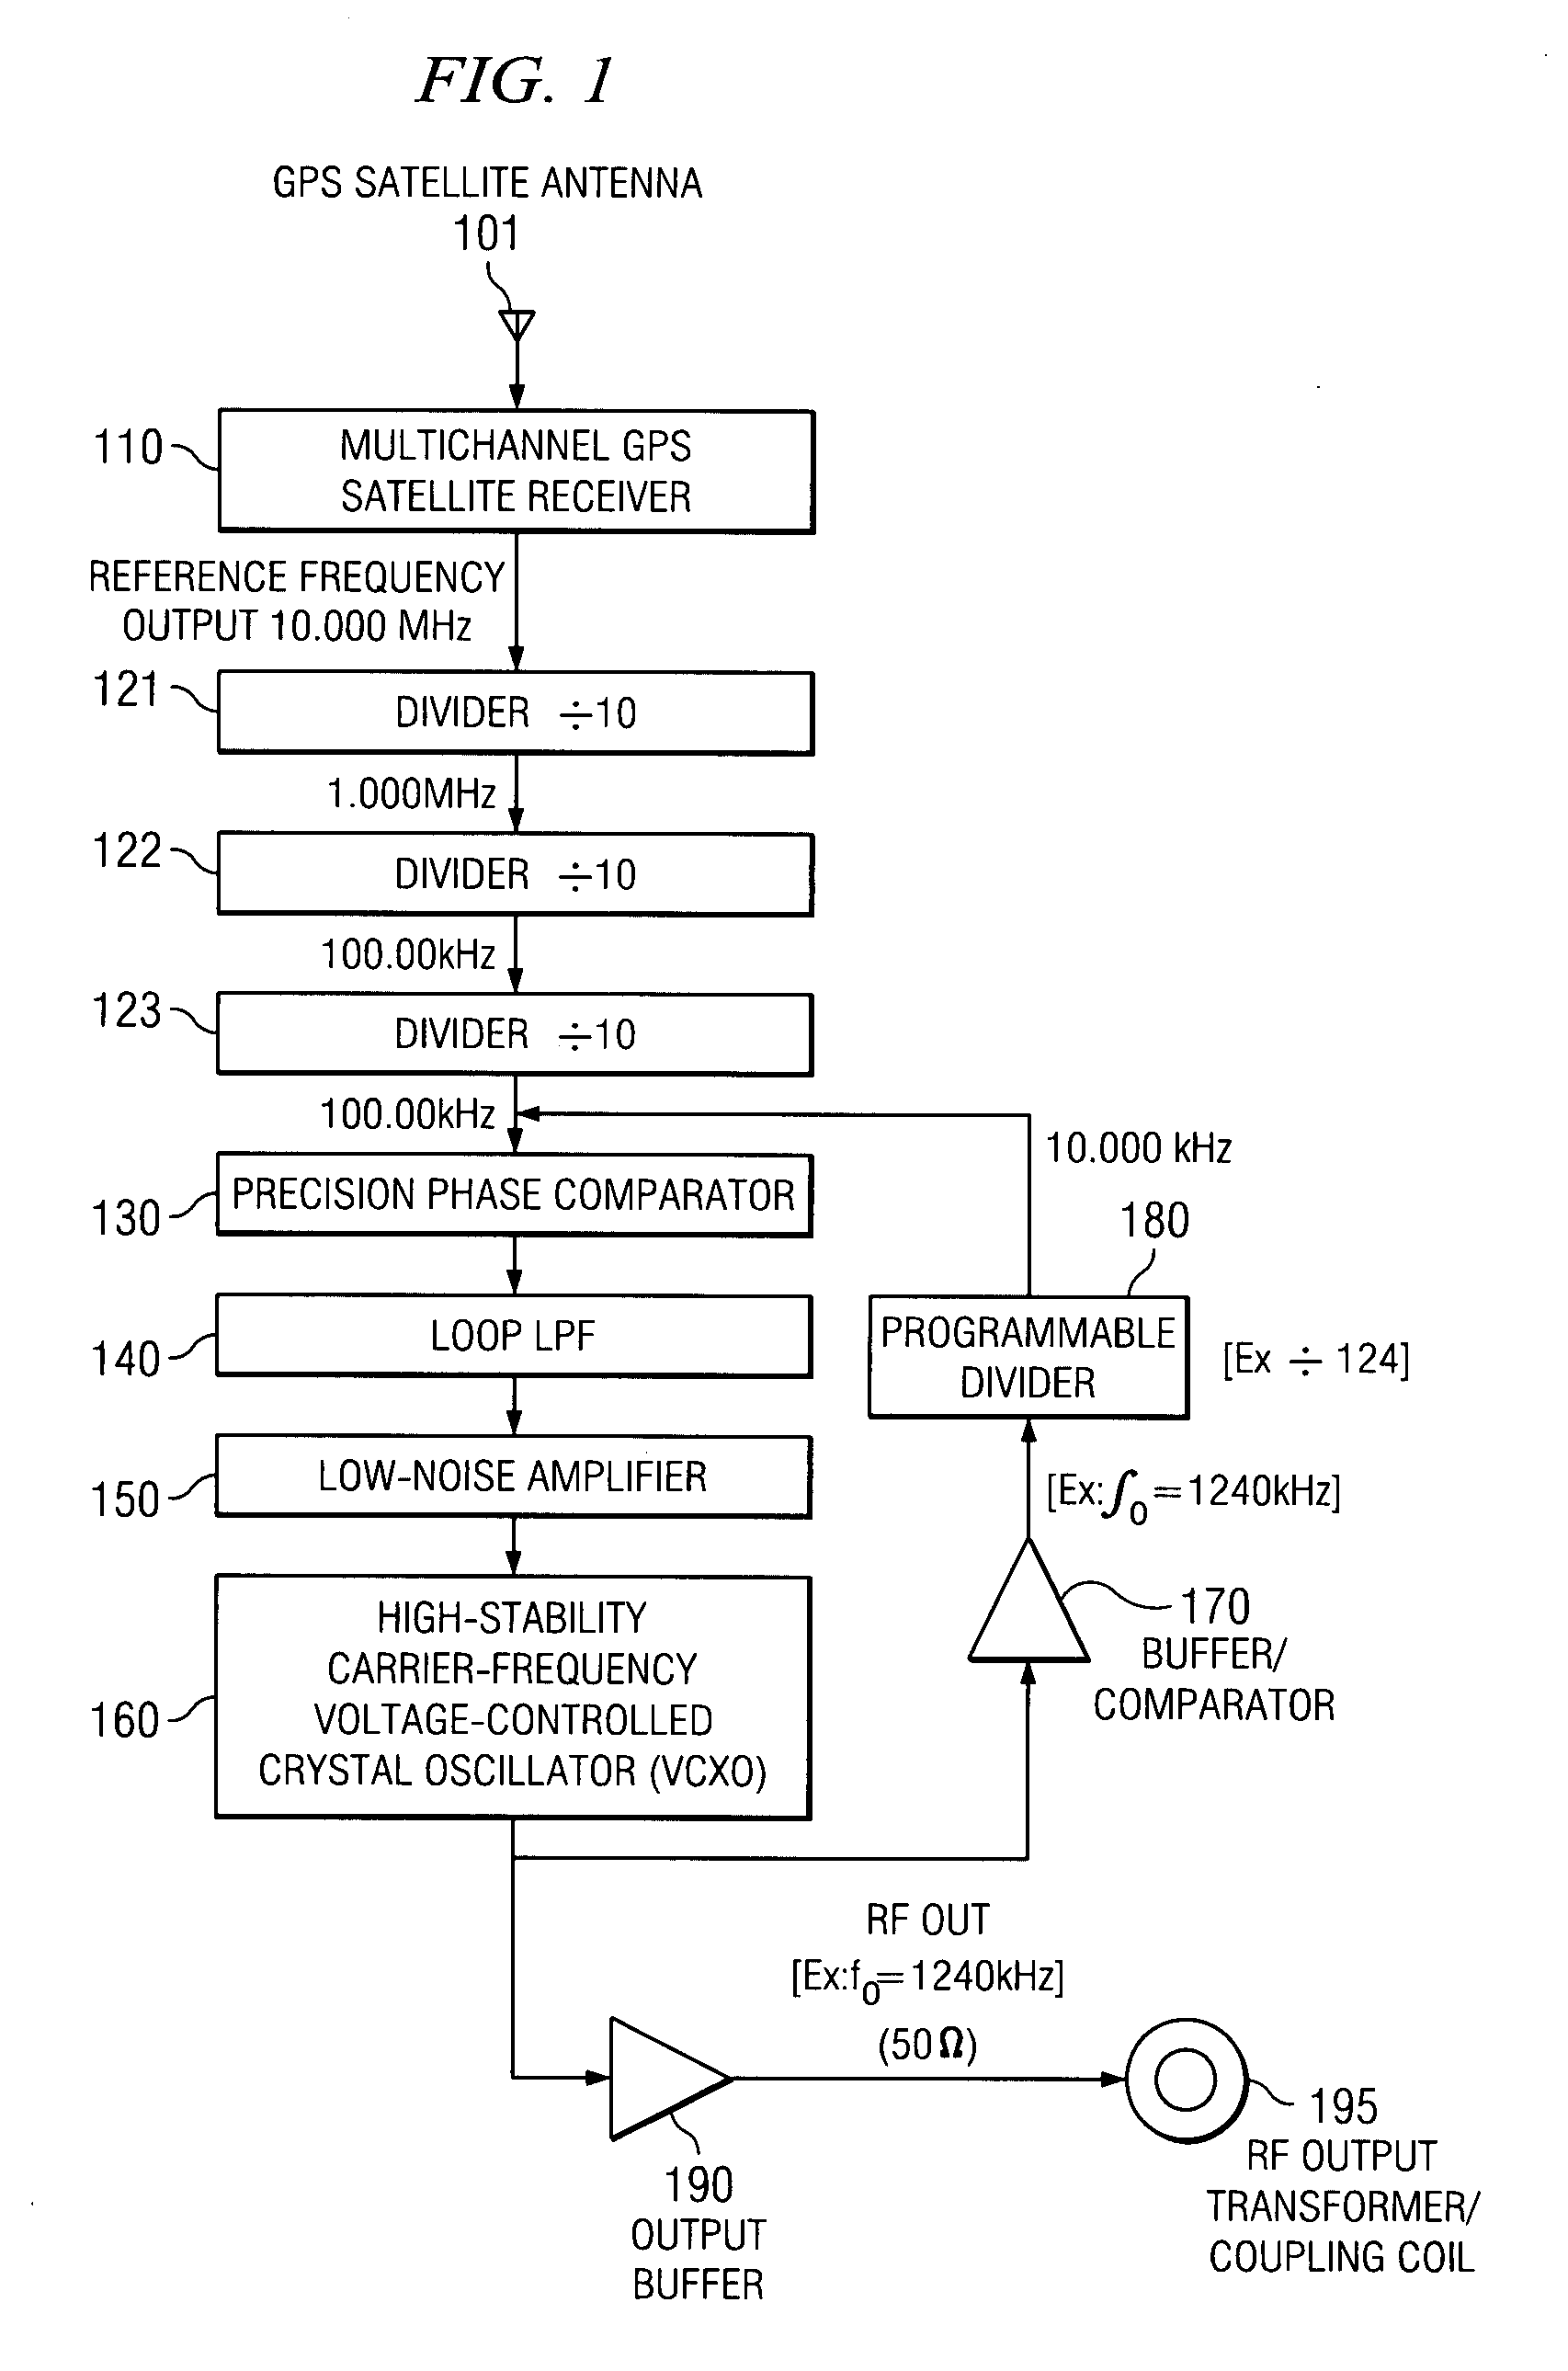 Carrier phase synchronization system for improved amplitude modulation and television broadcast reception